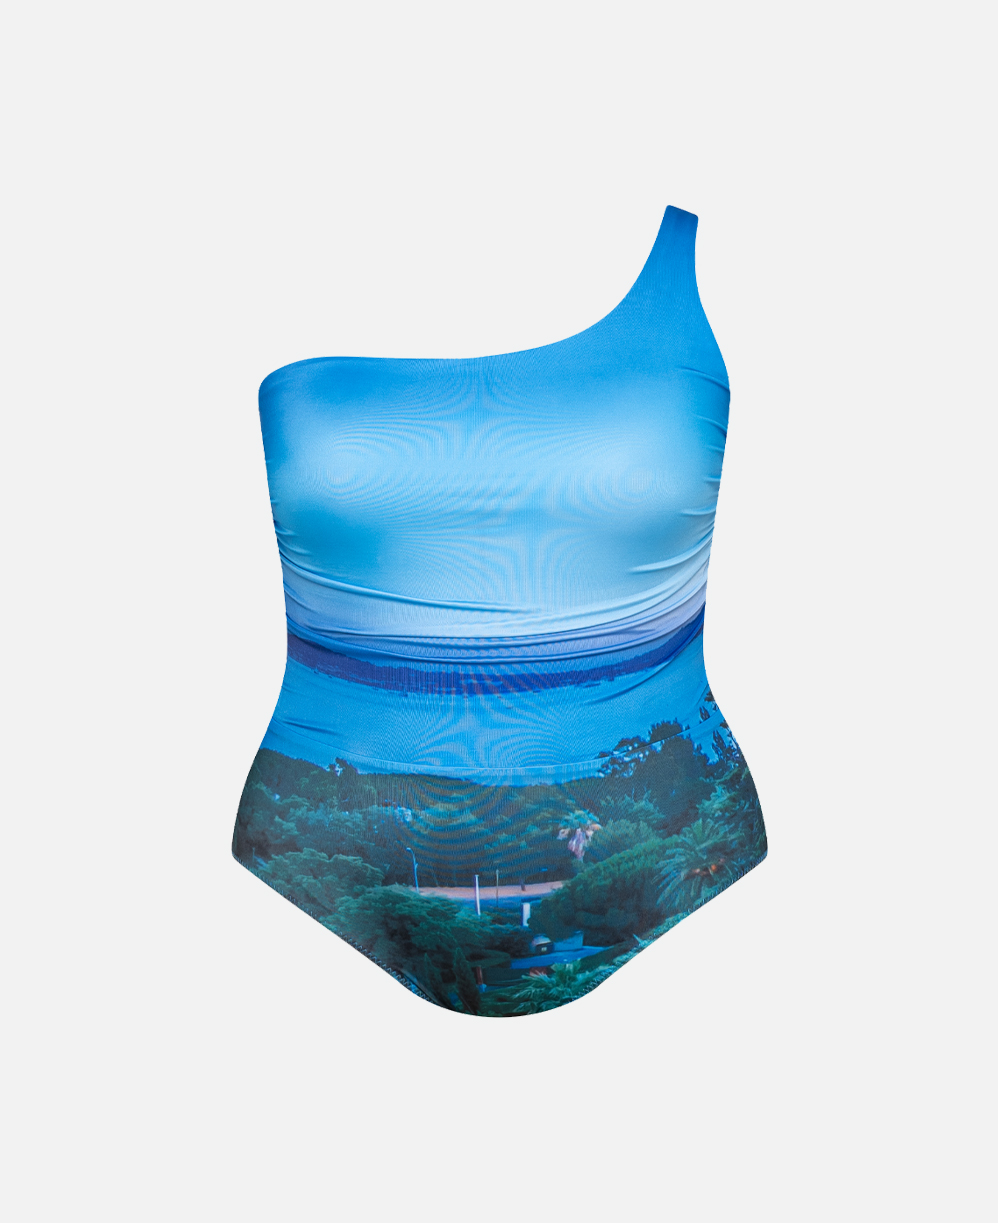 Monte Carlo Ruched Swimsuit (S606)